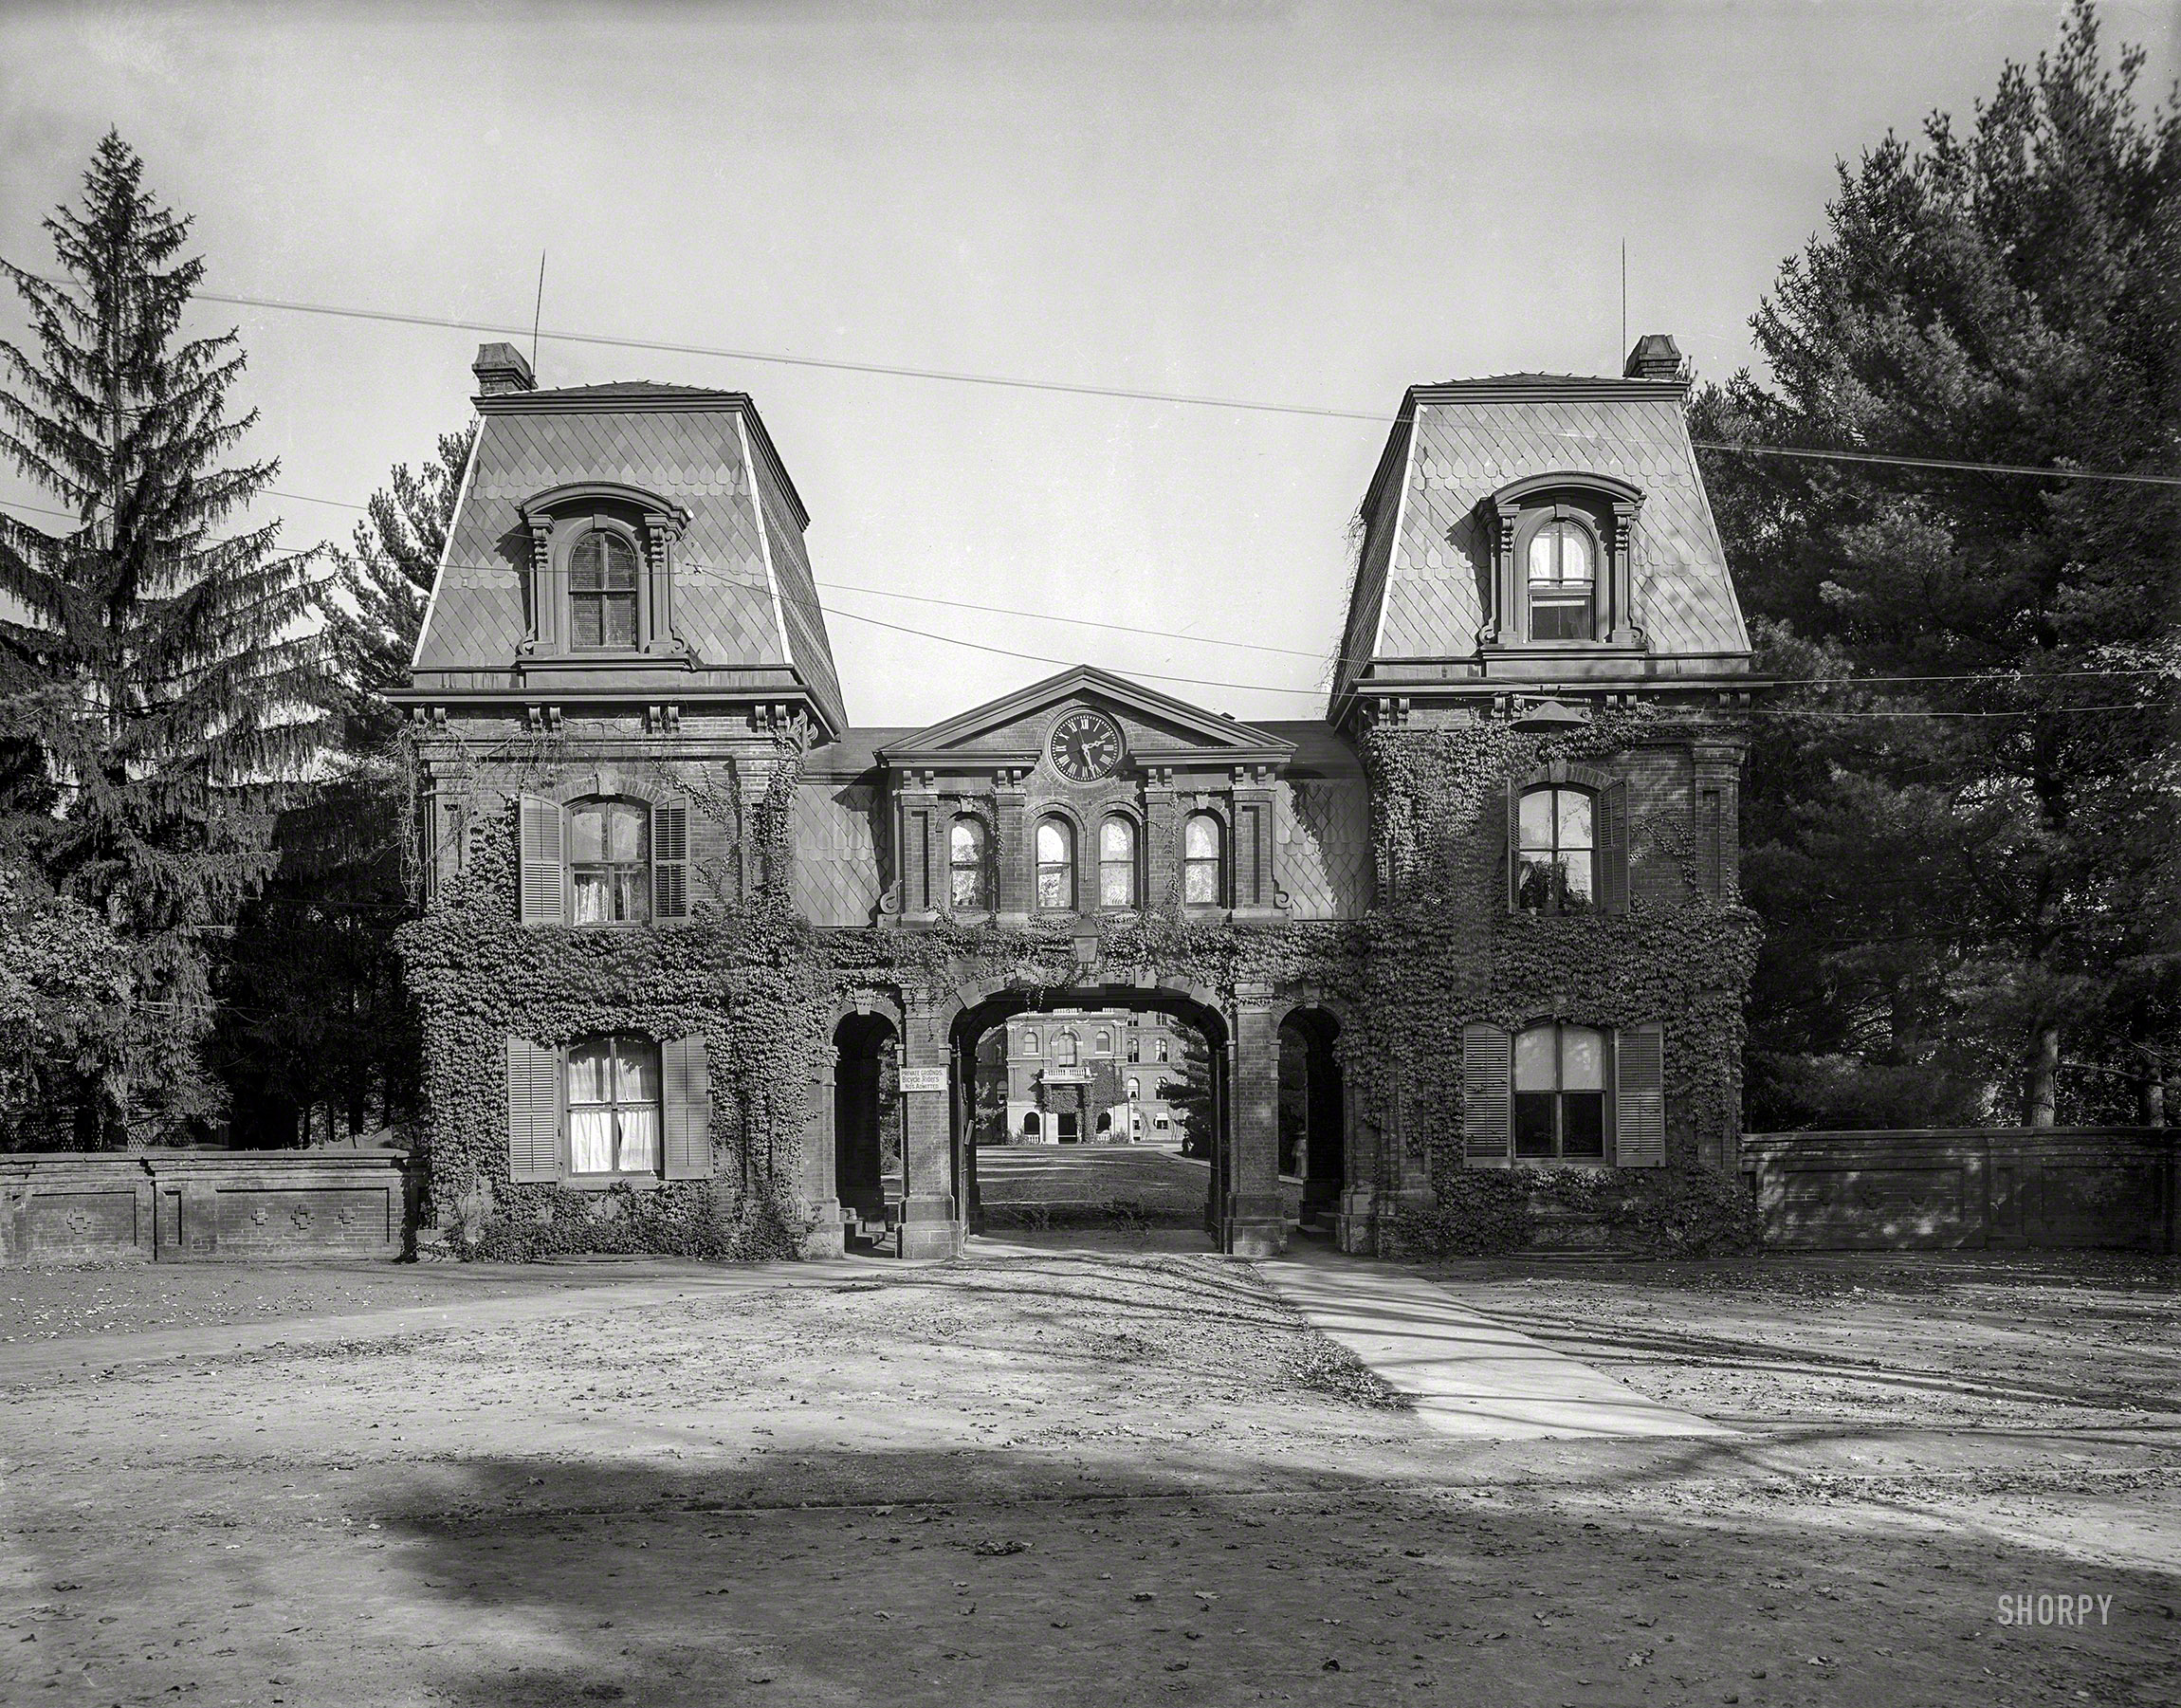 Poughkeepsie, N.Y., circa 1904. "The entrance, Vassar College." Note the sign. 8x10 inch glass transparency, Detroit Publishing Company. View full size.